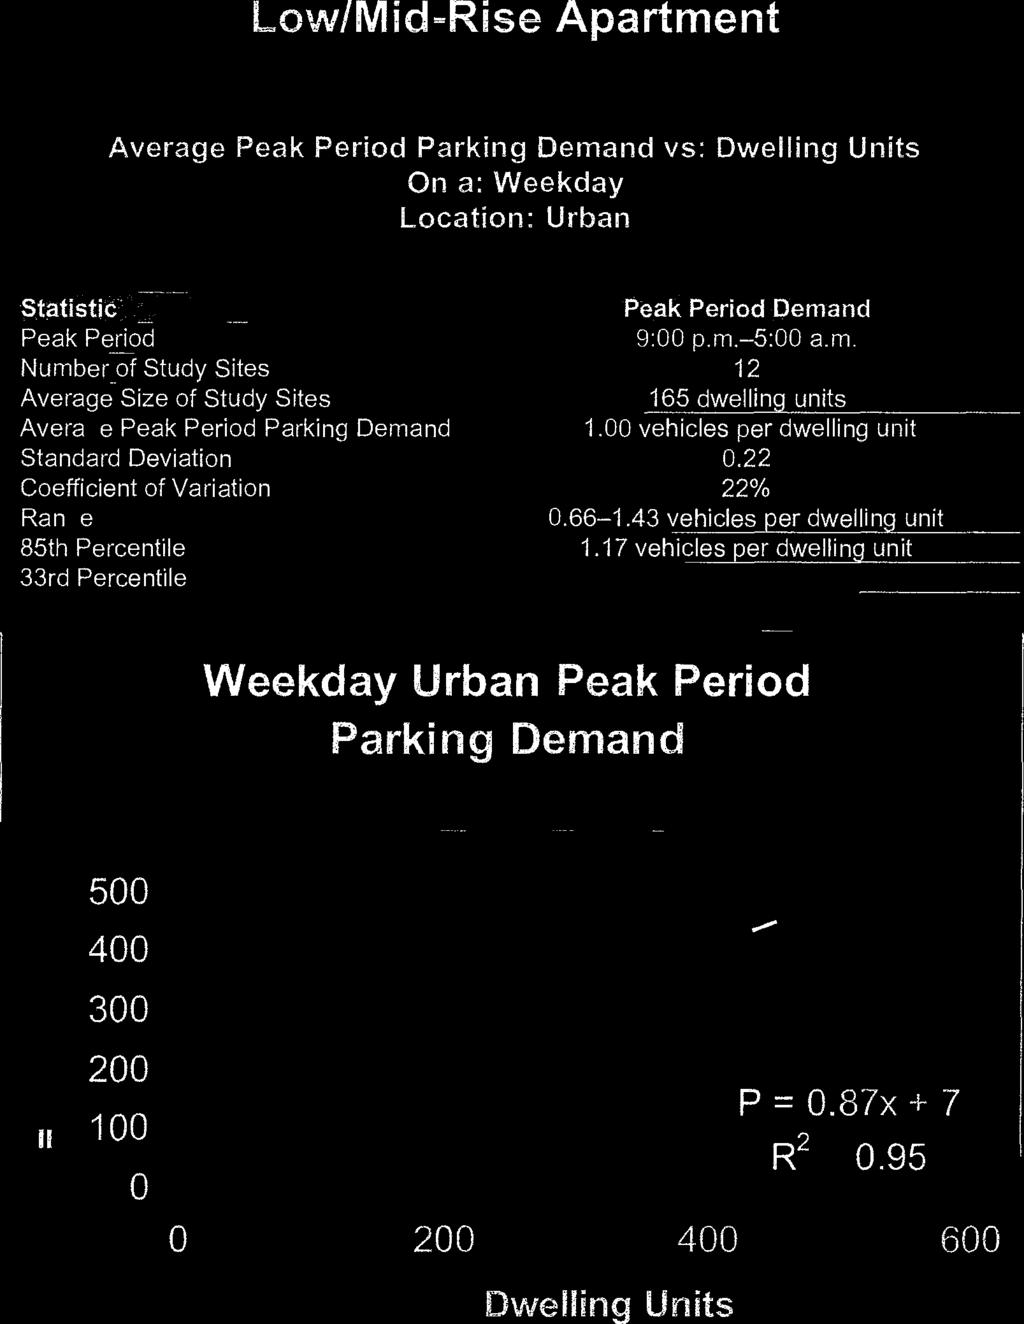 Land Use: 221 Low/Mid-Rise Apartment Average Peak Period Parking Demand vs: Dwelling Units On a: Weekday Location: Urban Statistic Peak Period Demand Peak Period 9: p.m.-5: a.m. Number of Study Sites 12 Average Size of Study Sites 165 dwelling units Avera.